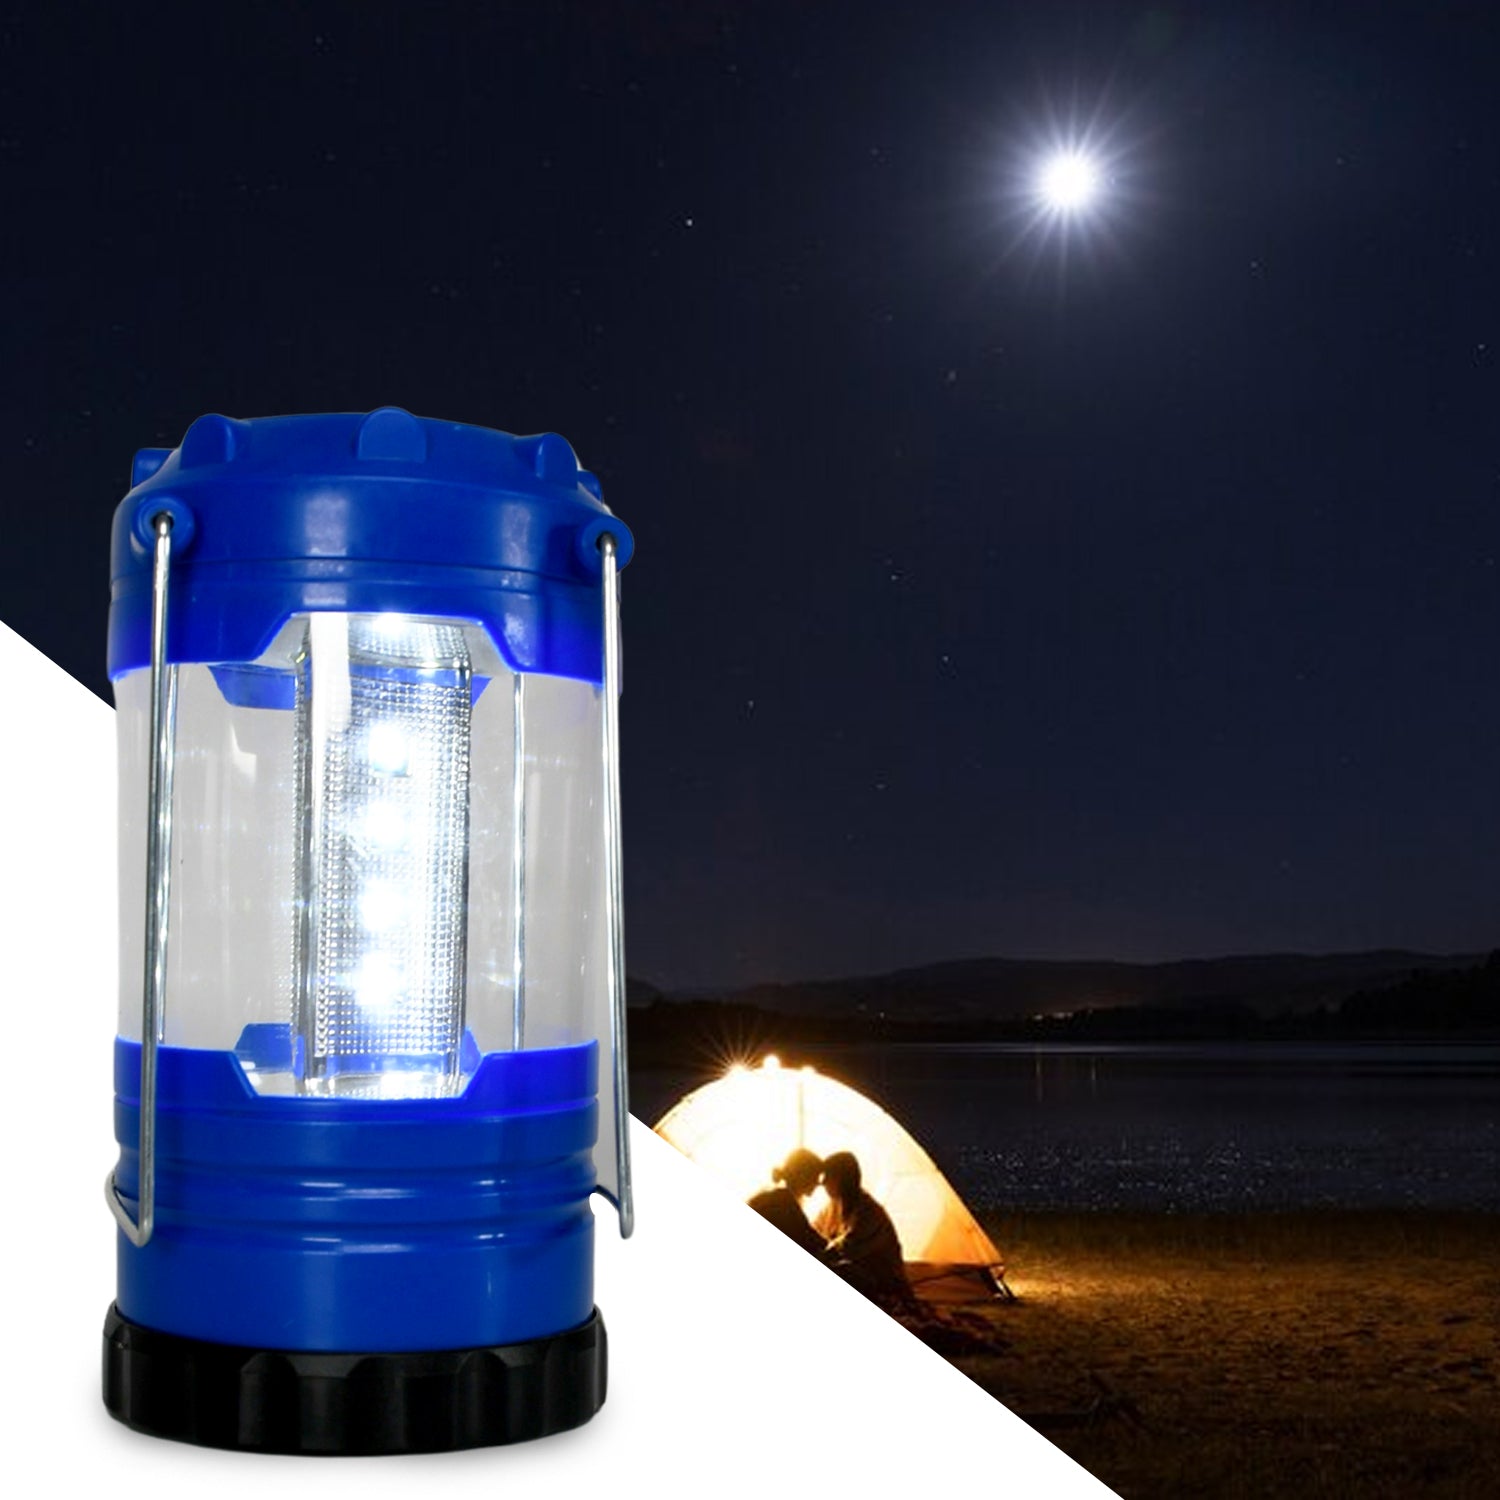 12690 Camping Lanterns, White Light Safe Durable Tent Light Portable and Lightweight for Hiking Night Fishing for Camping, Waterproof Battery, Battery operated Light (Battery Not Included)